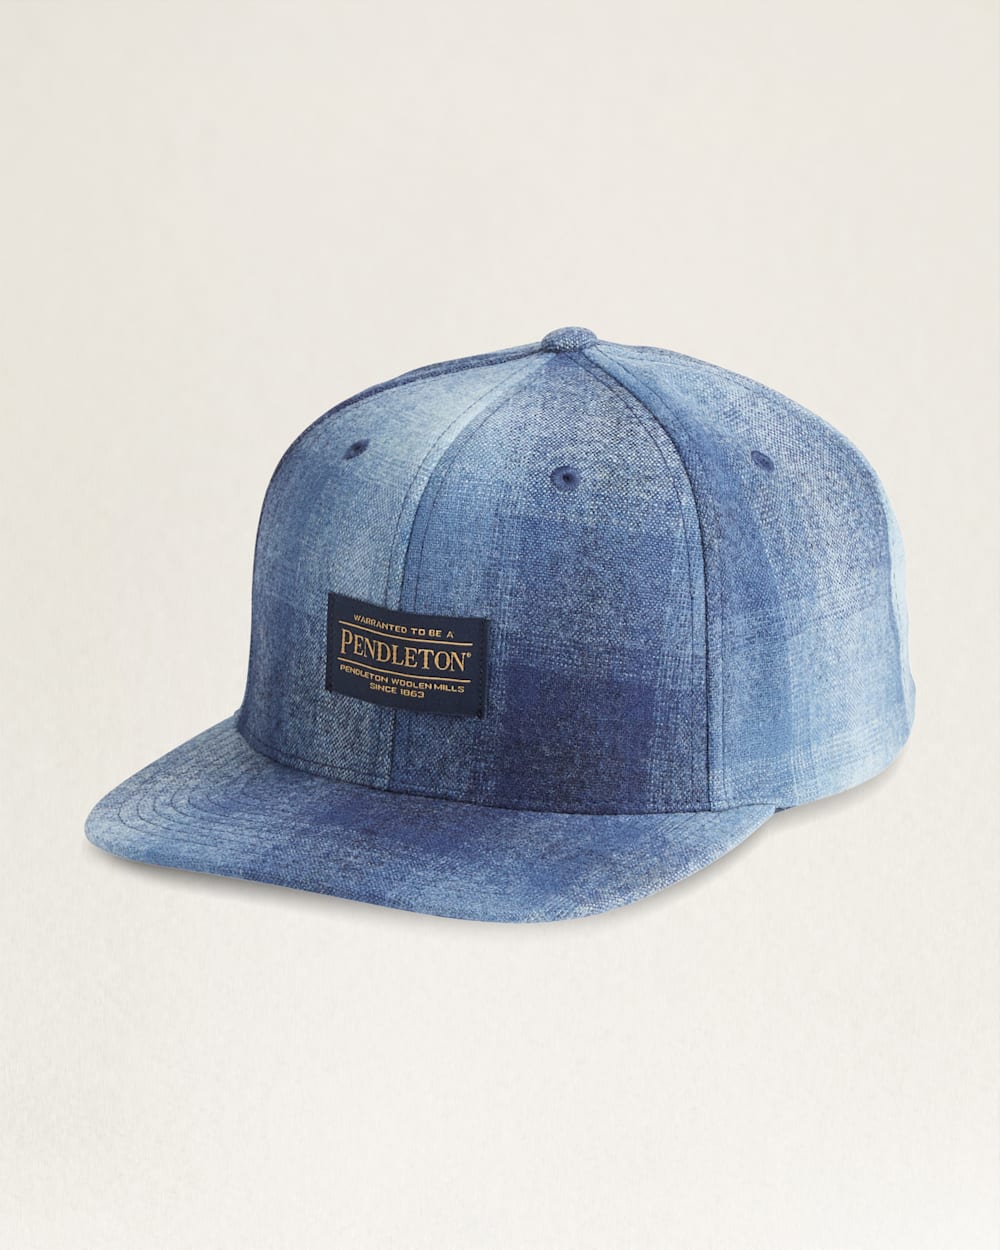 PLAID FLAT BRIM HAT IN NAVY MIX OMBRE image number 1